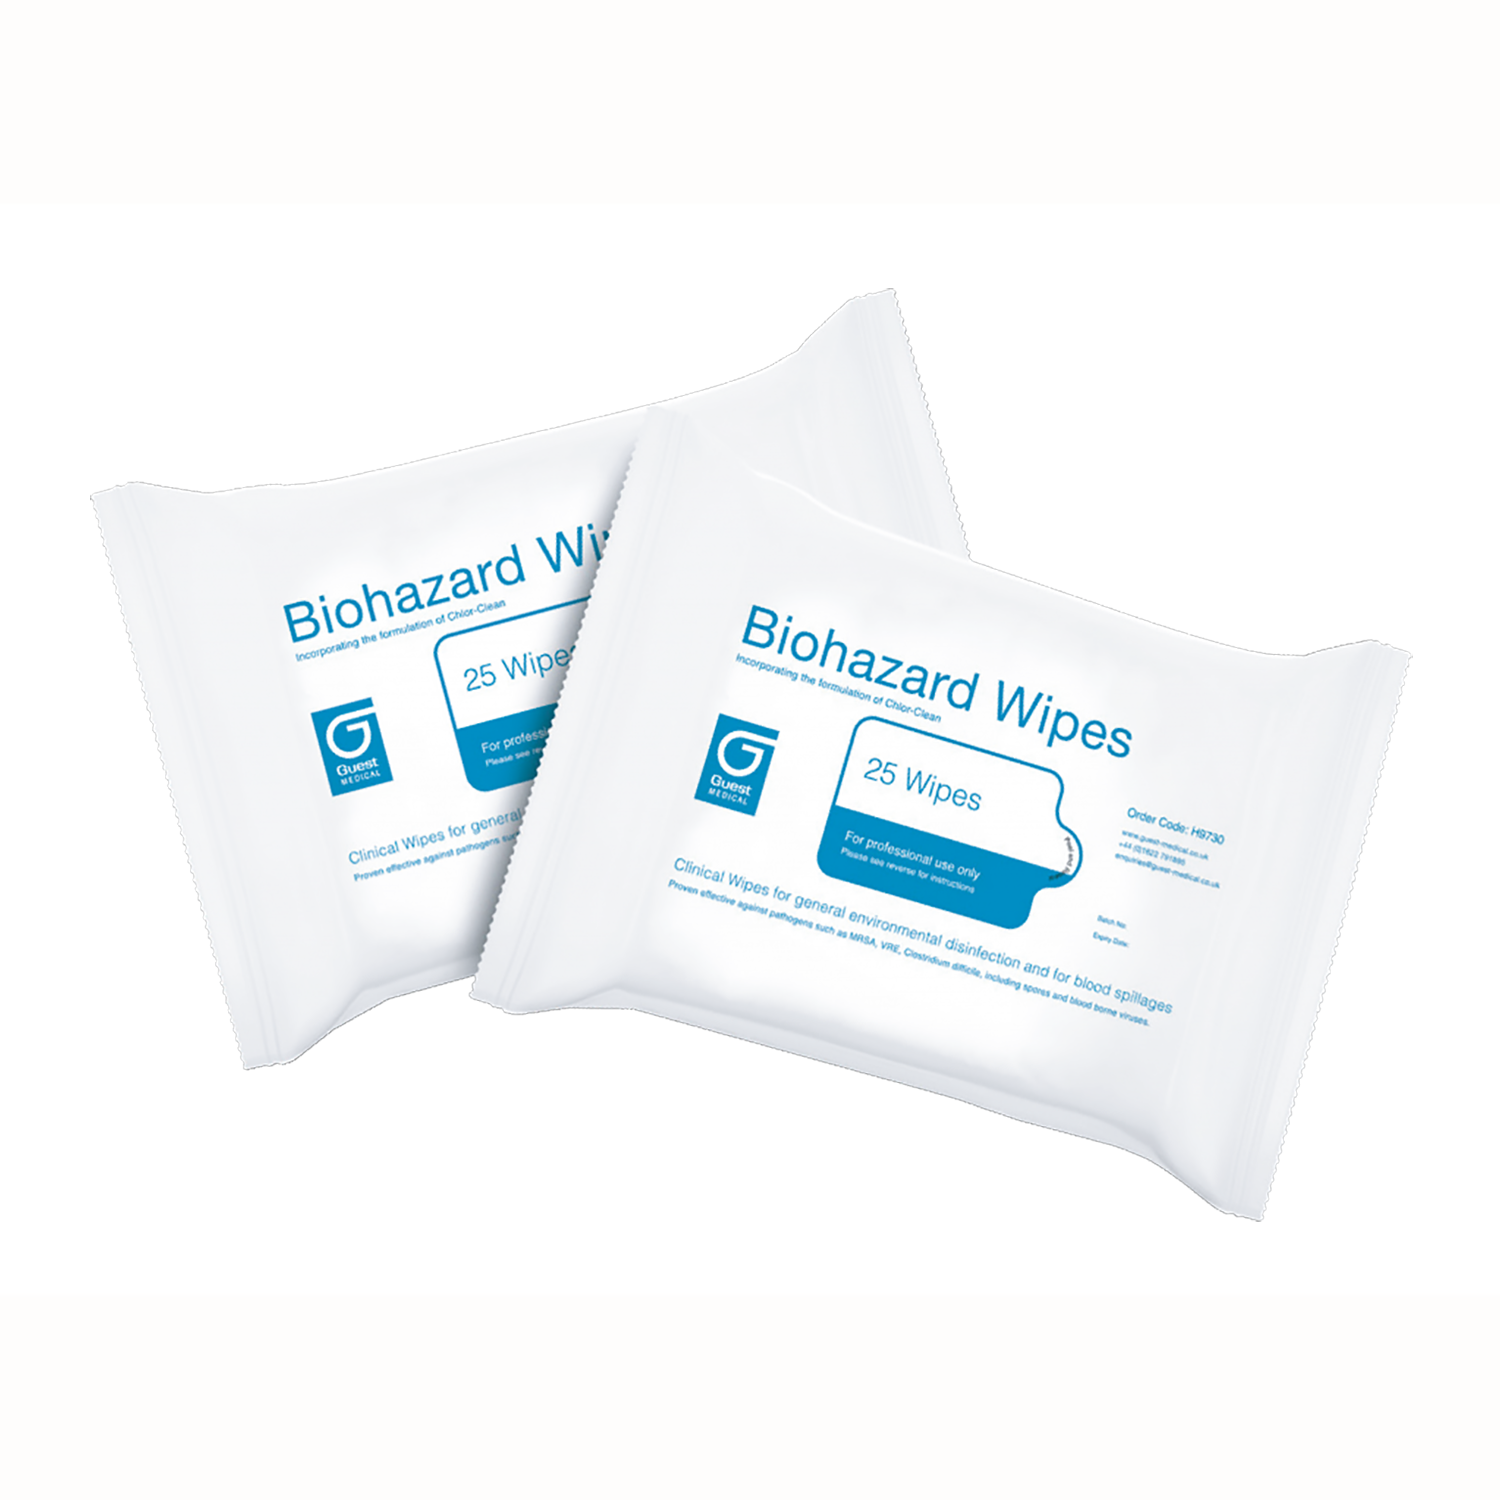 Biohazard Wipes | Pack of 25 Wipes (Single Pack) | Short Expiry Date (1)